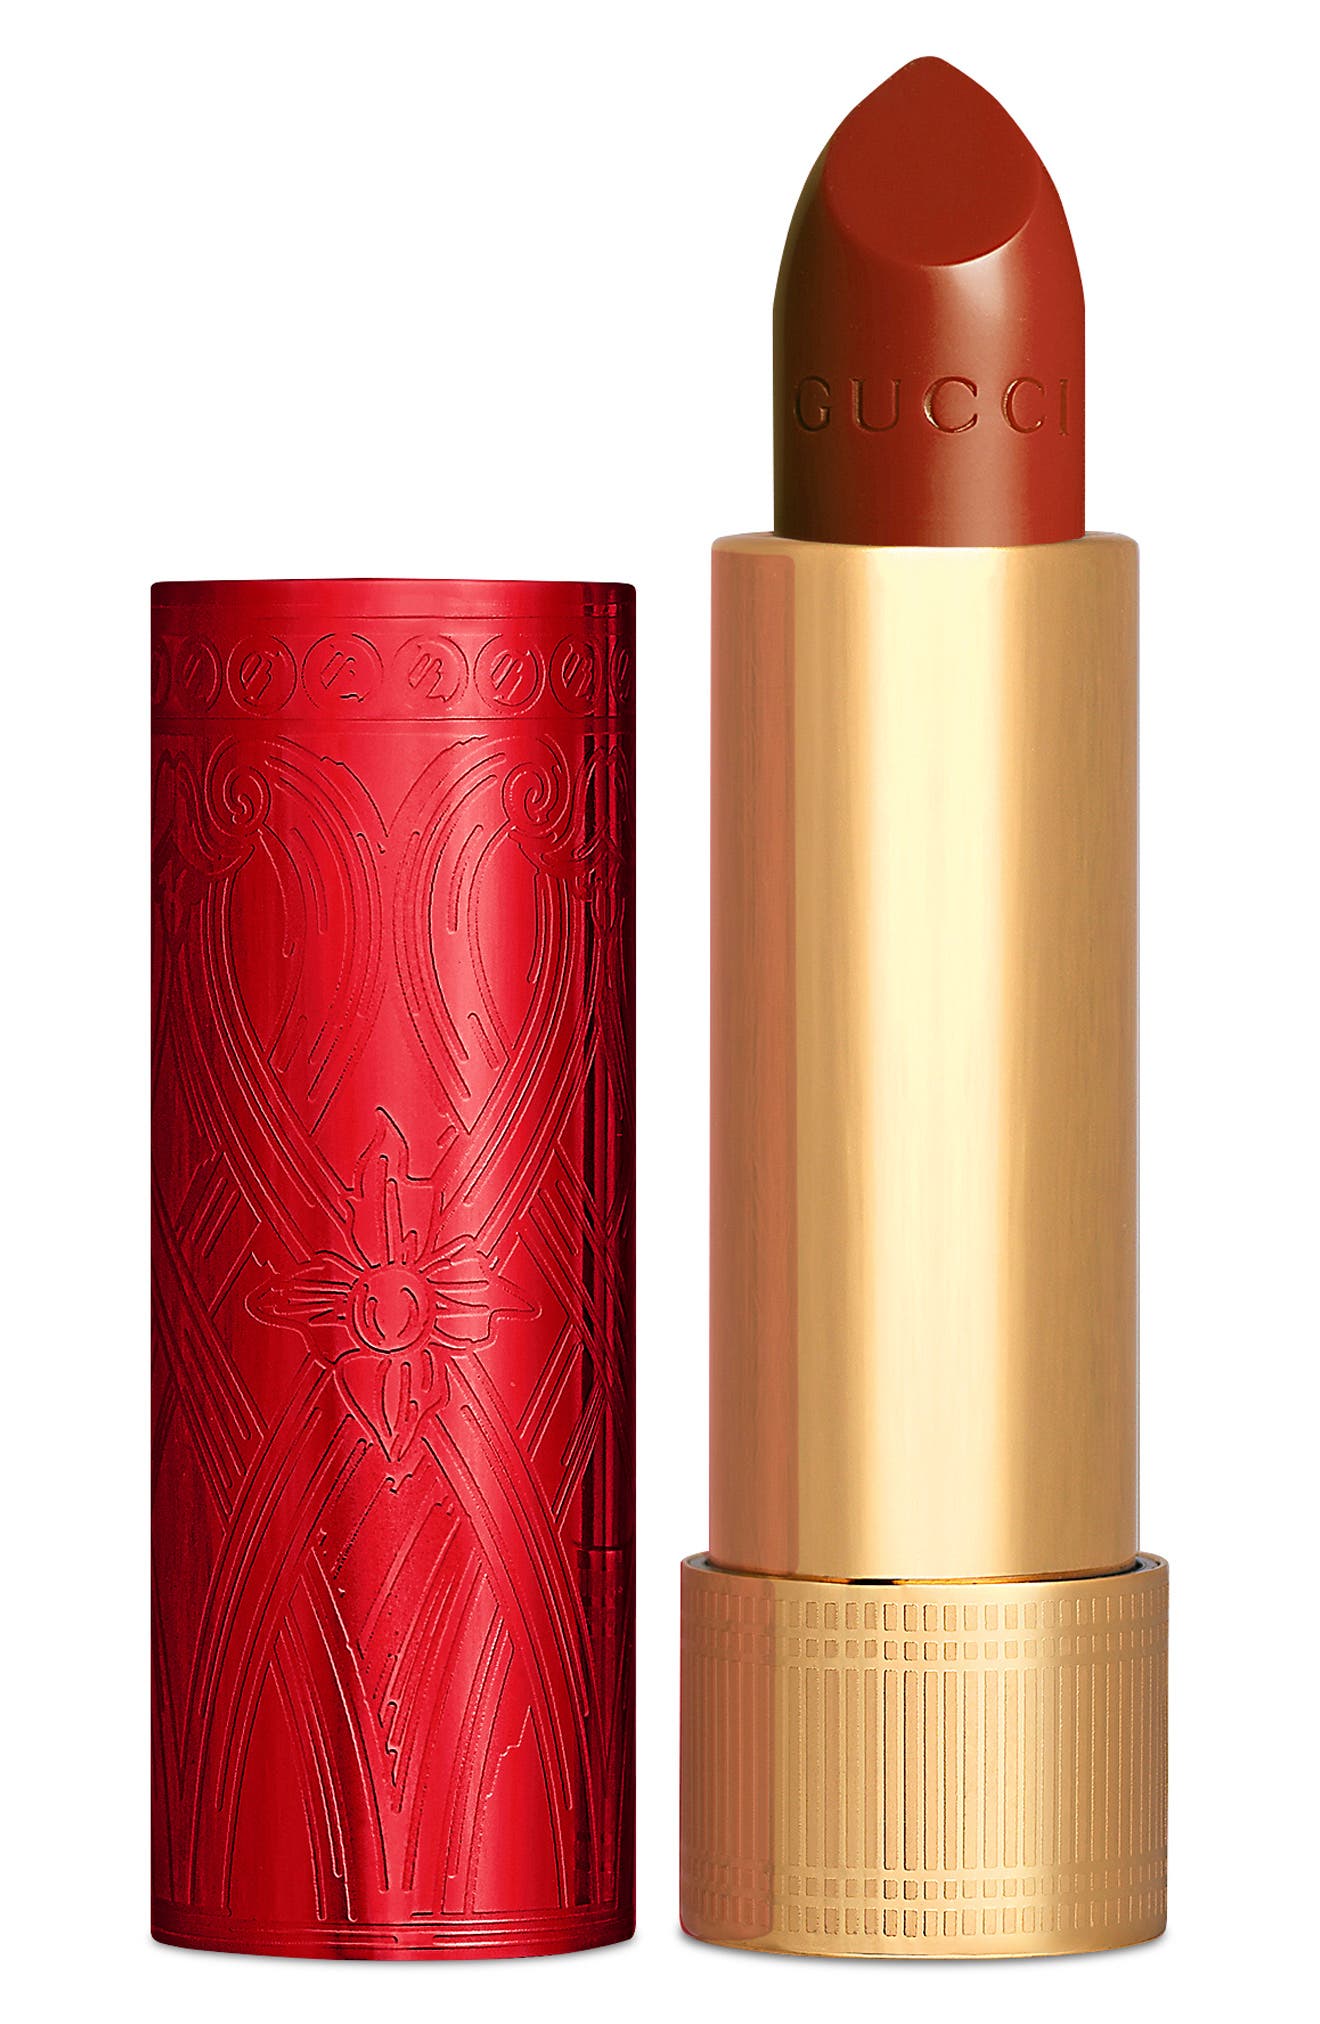 Gucci Lunar New Year Rouge a Levres Satin Lipstick in 505 Janet Rust at Nordstrom